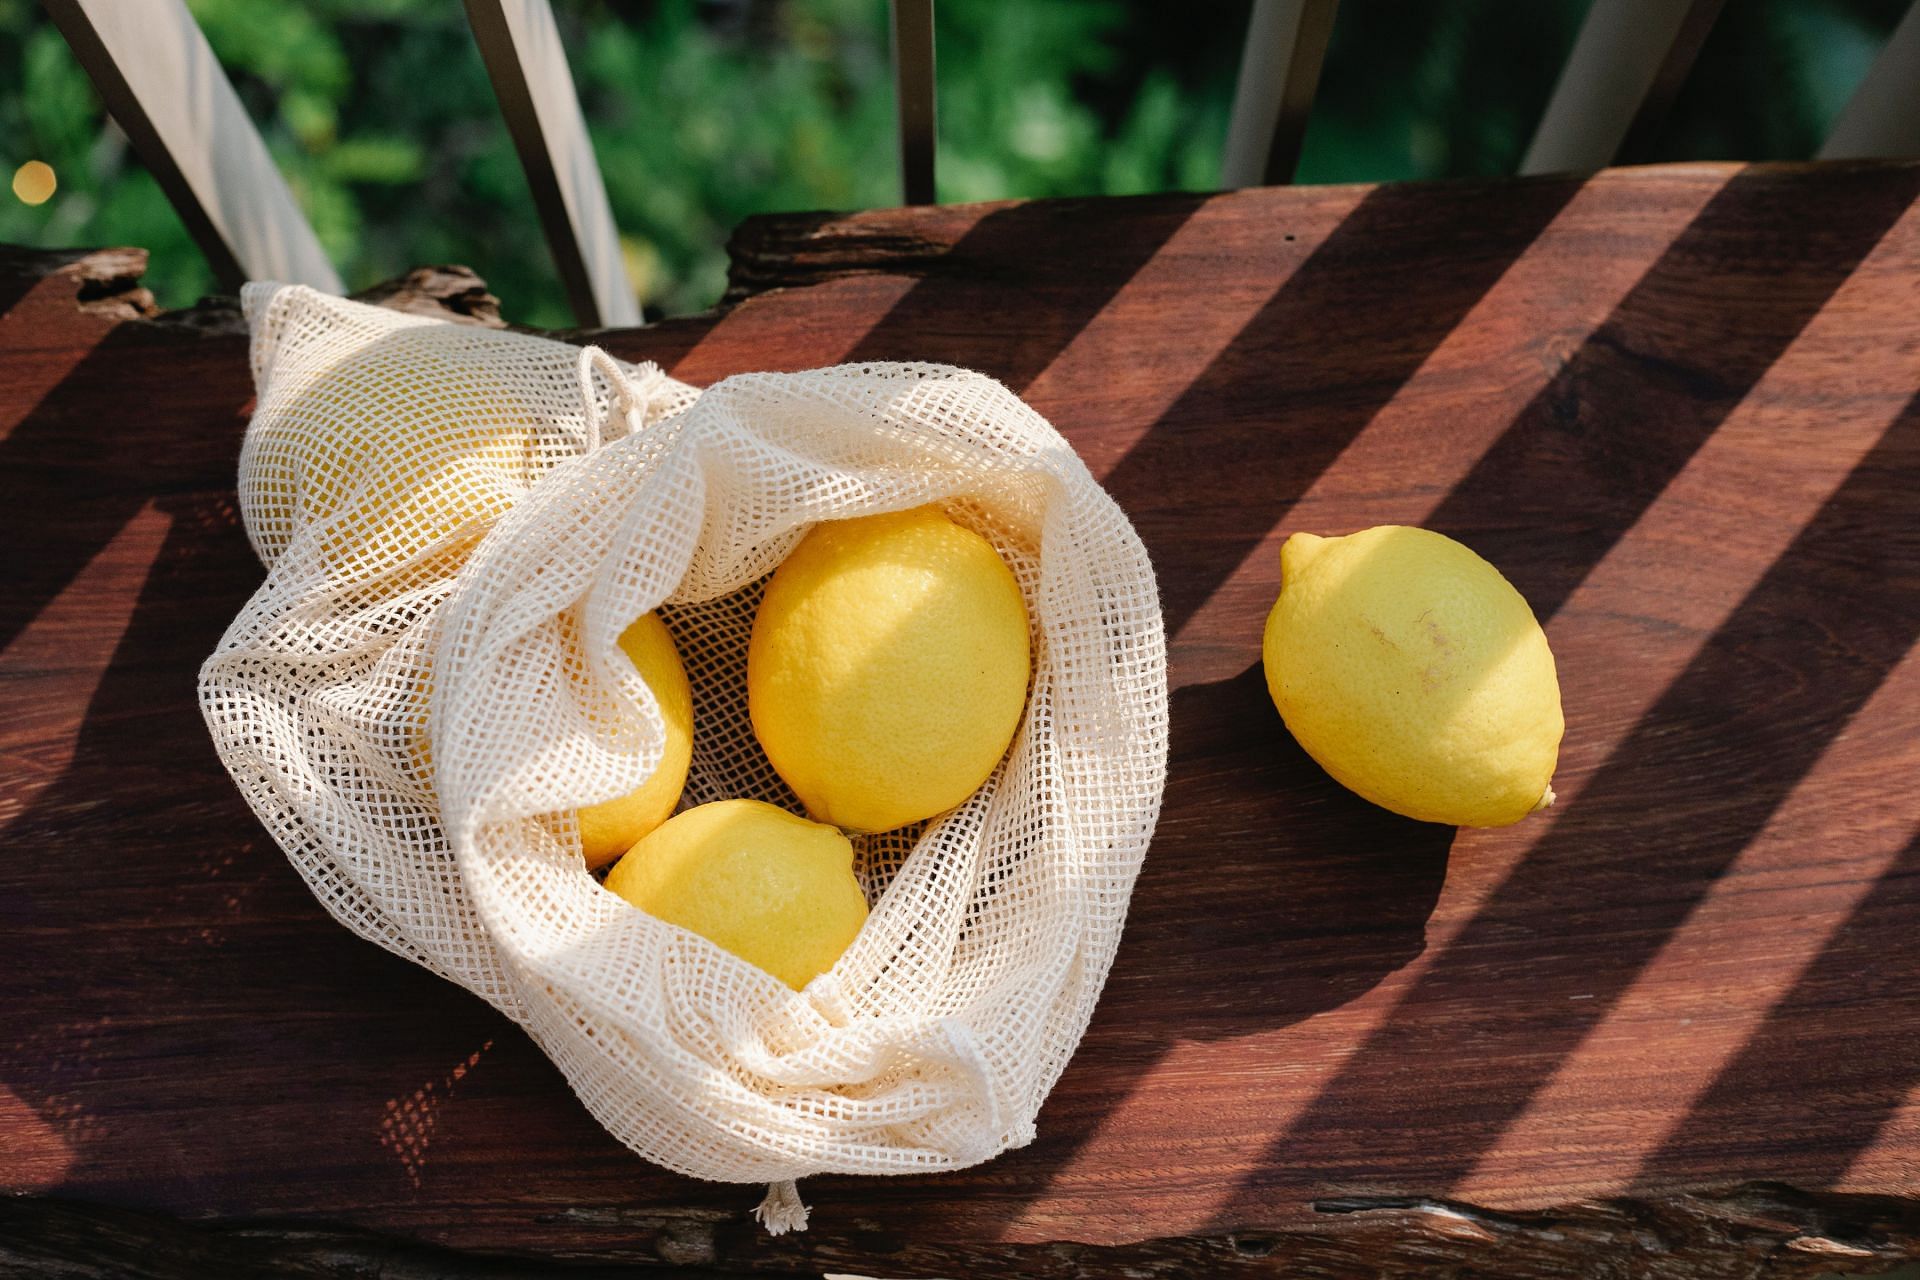 Limes are rich in vitamin C &amp; other nutrients. (Image via Pexels / Sarah Chai)